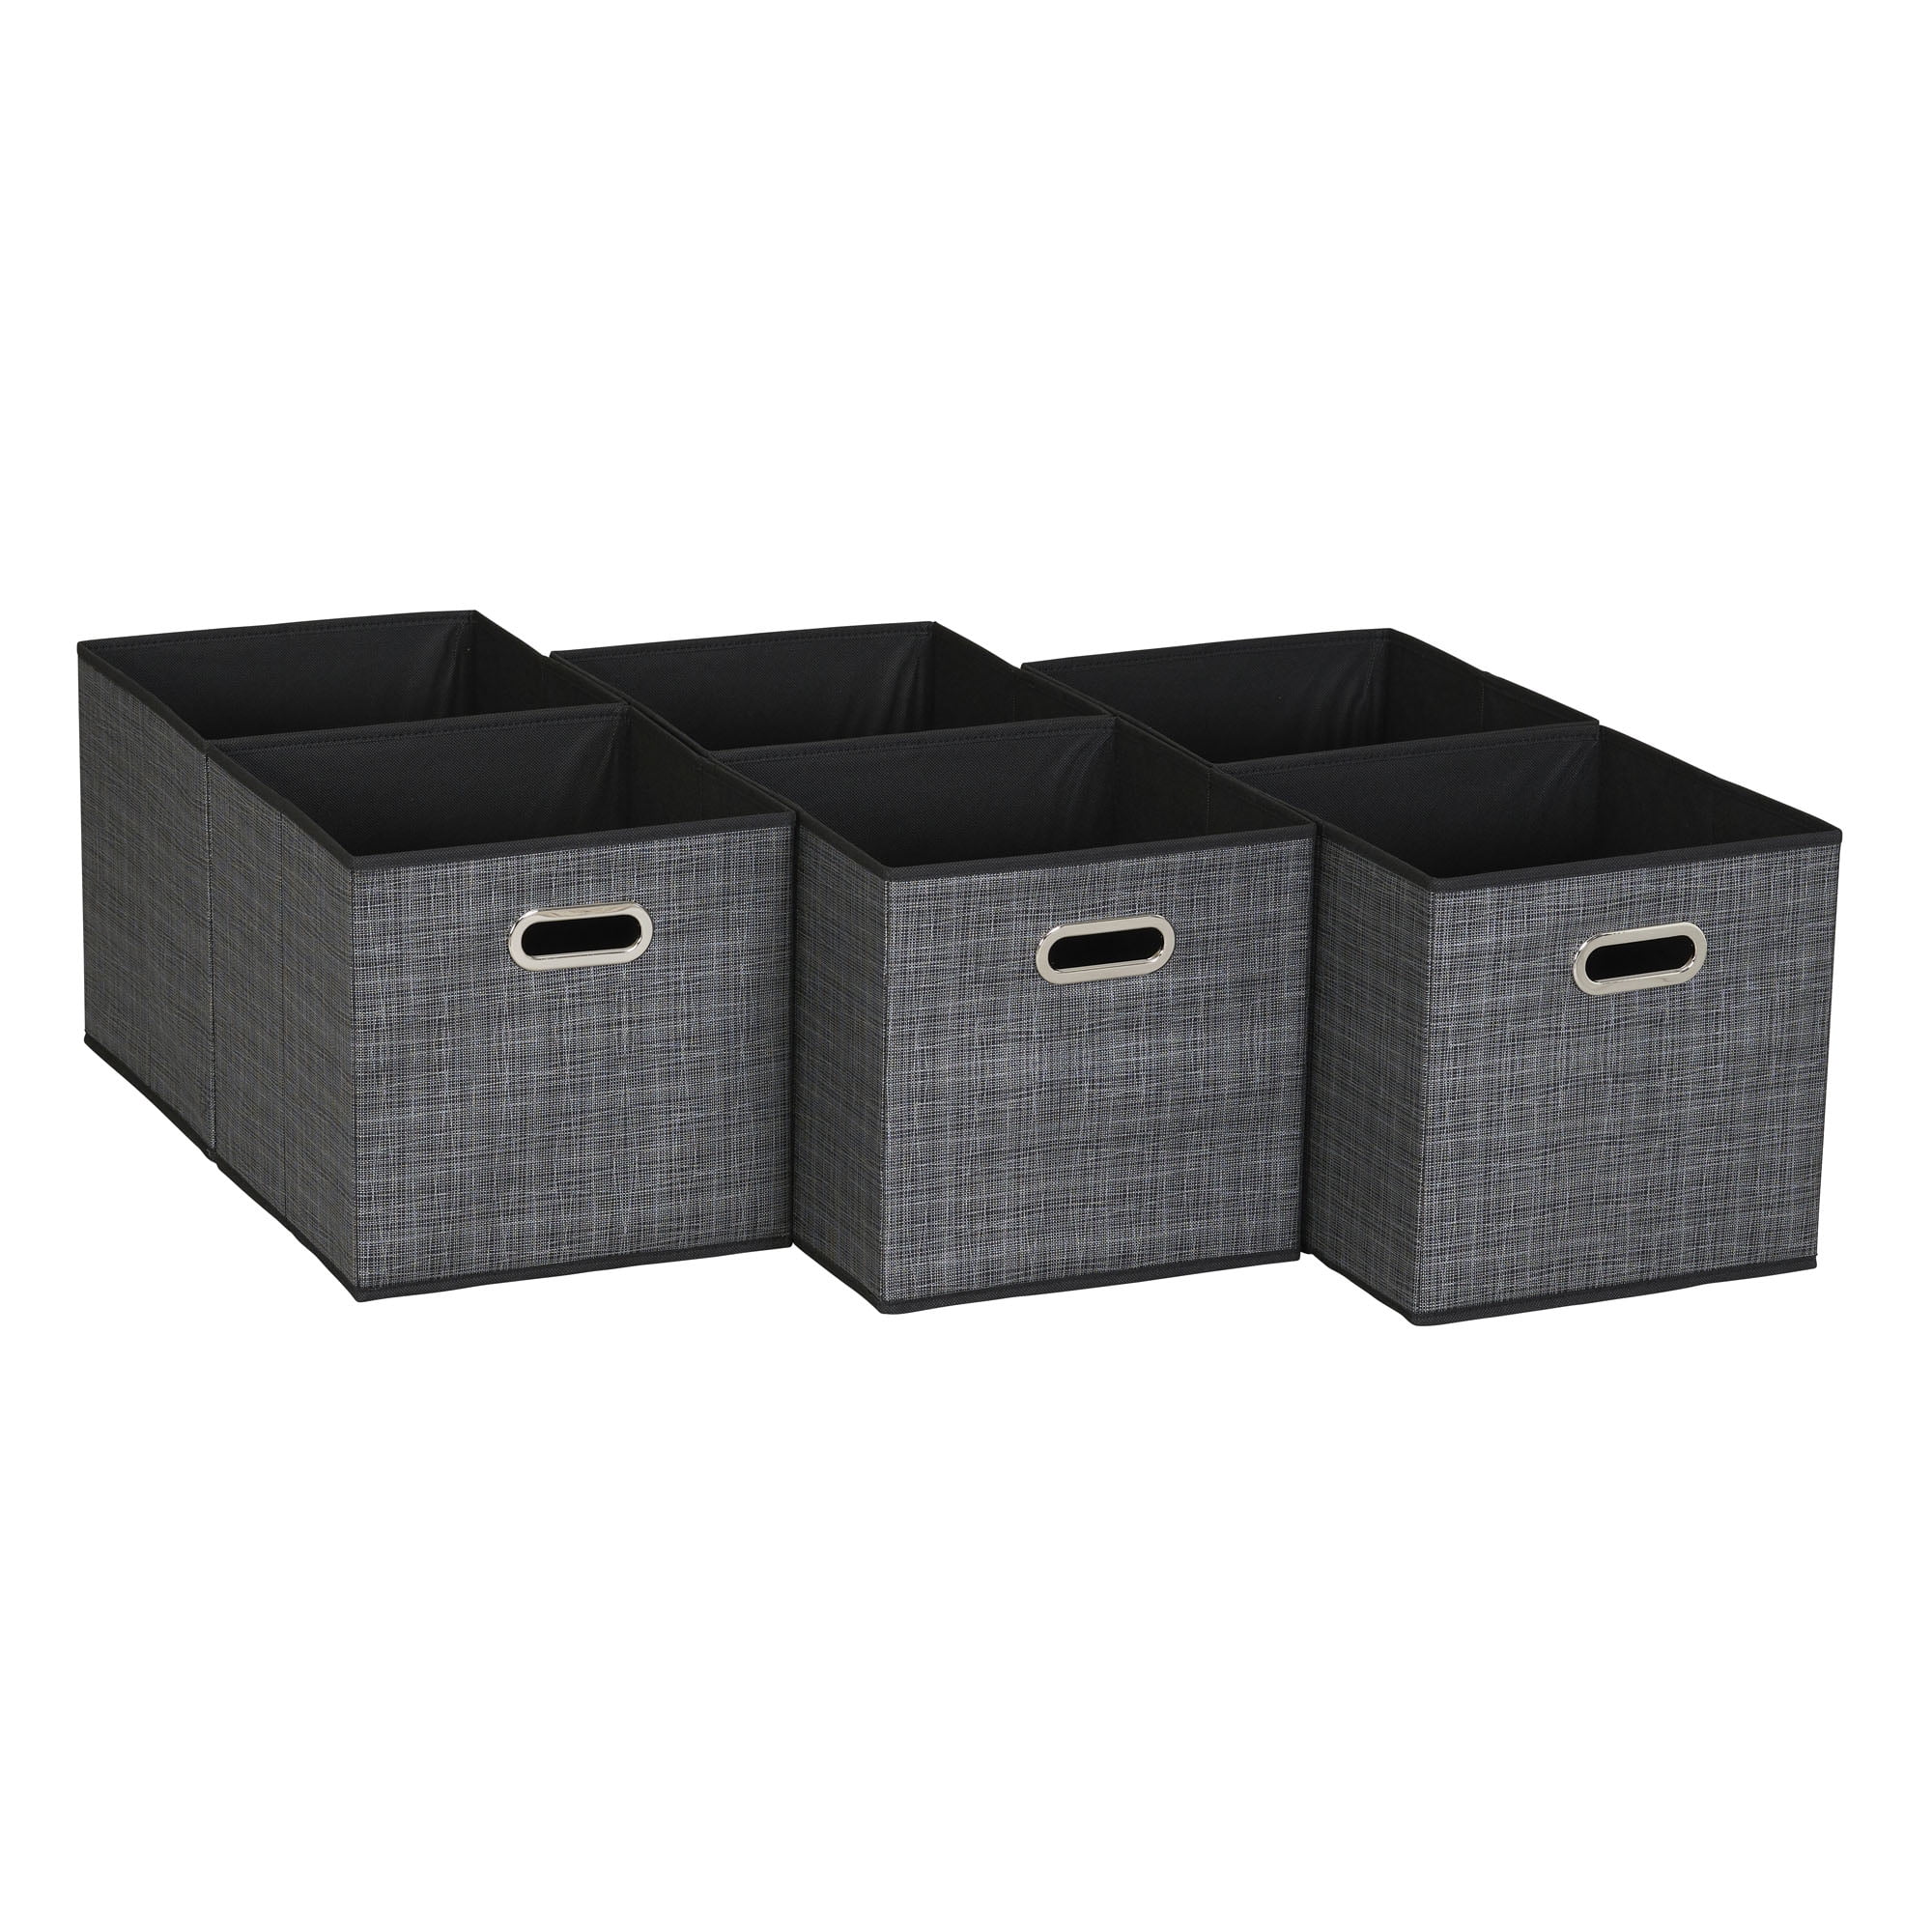 Casafield Set Of 6 Collapsible Fabric Storage Cube Bins, Black